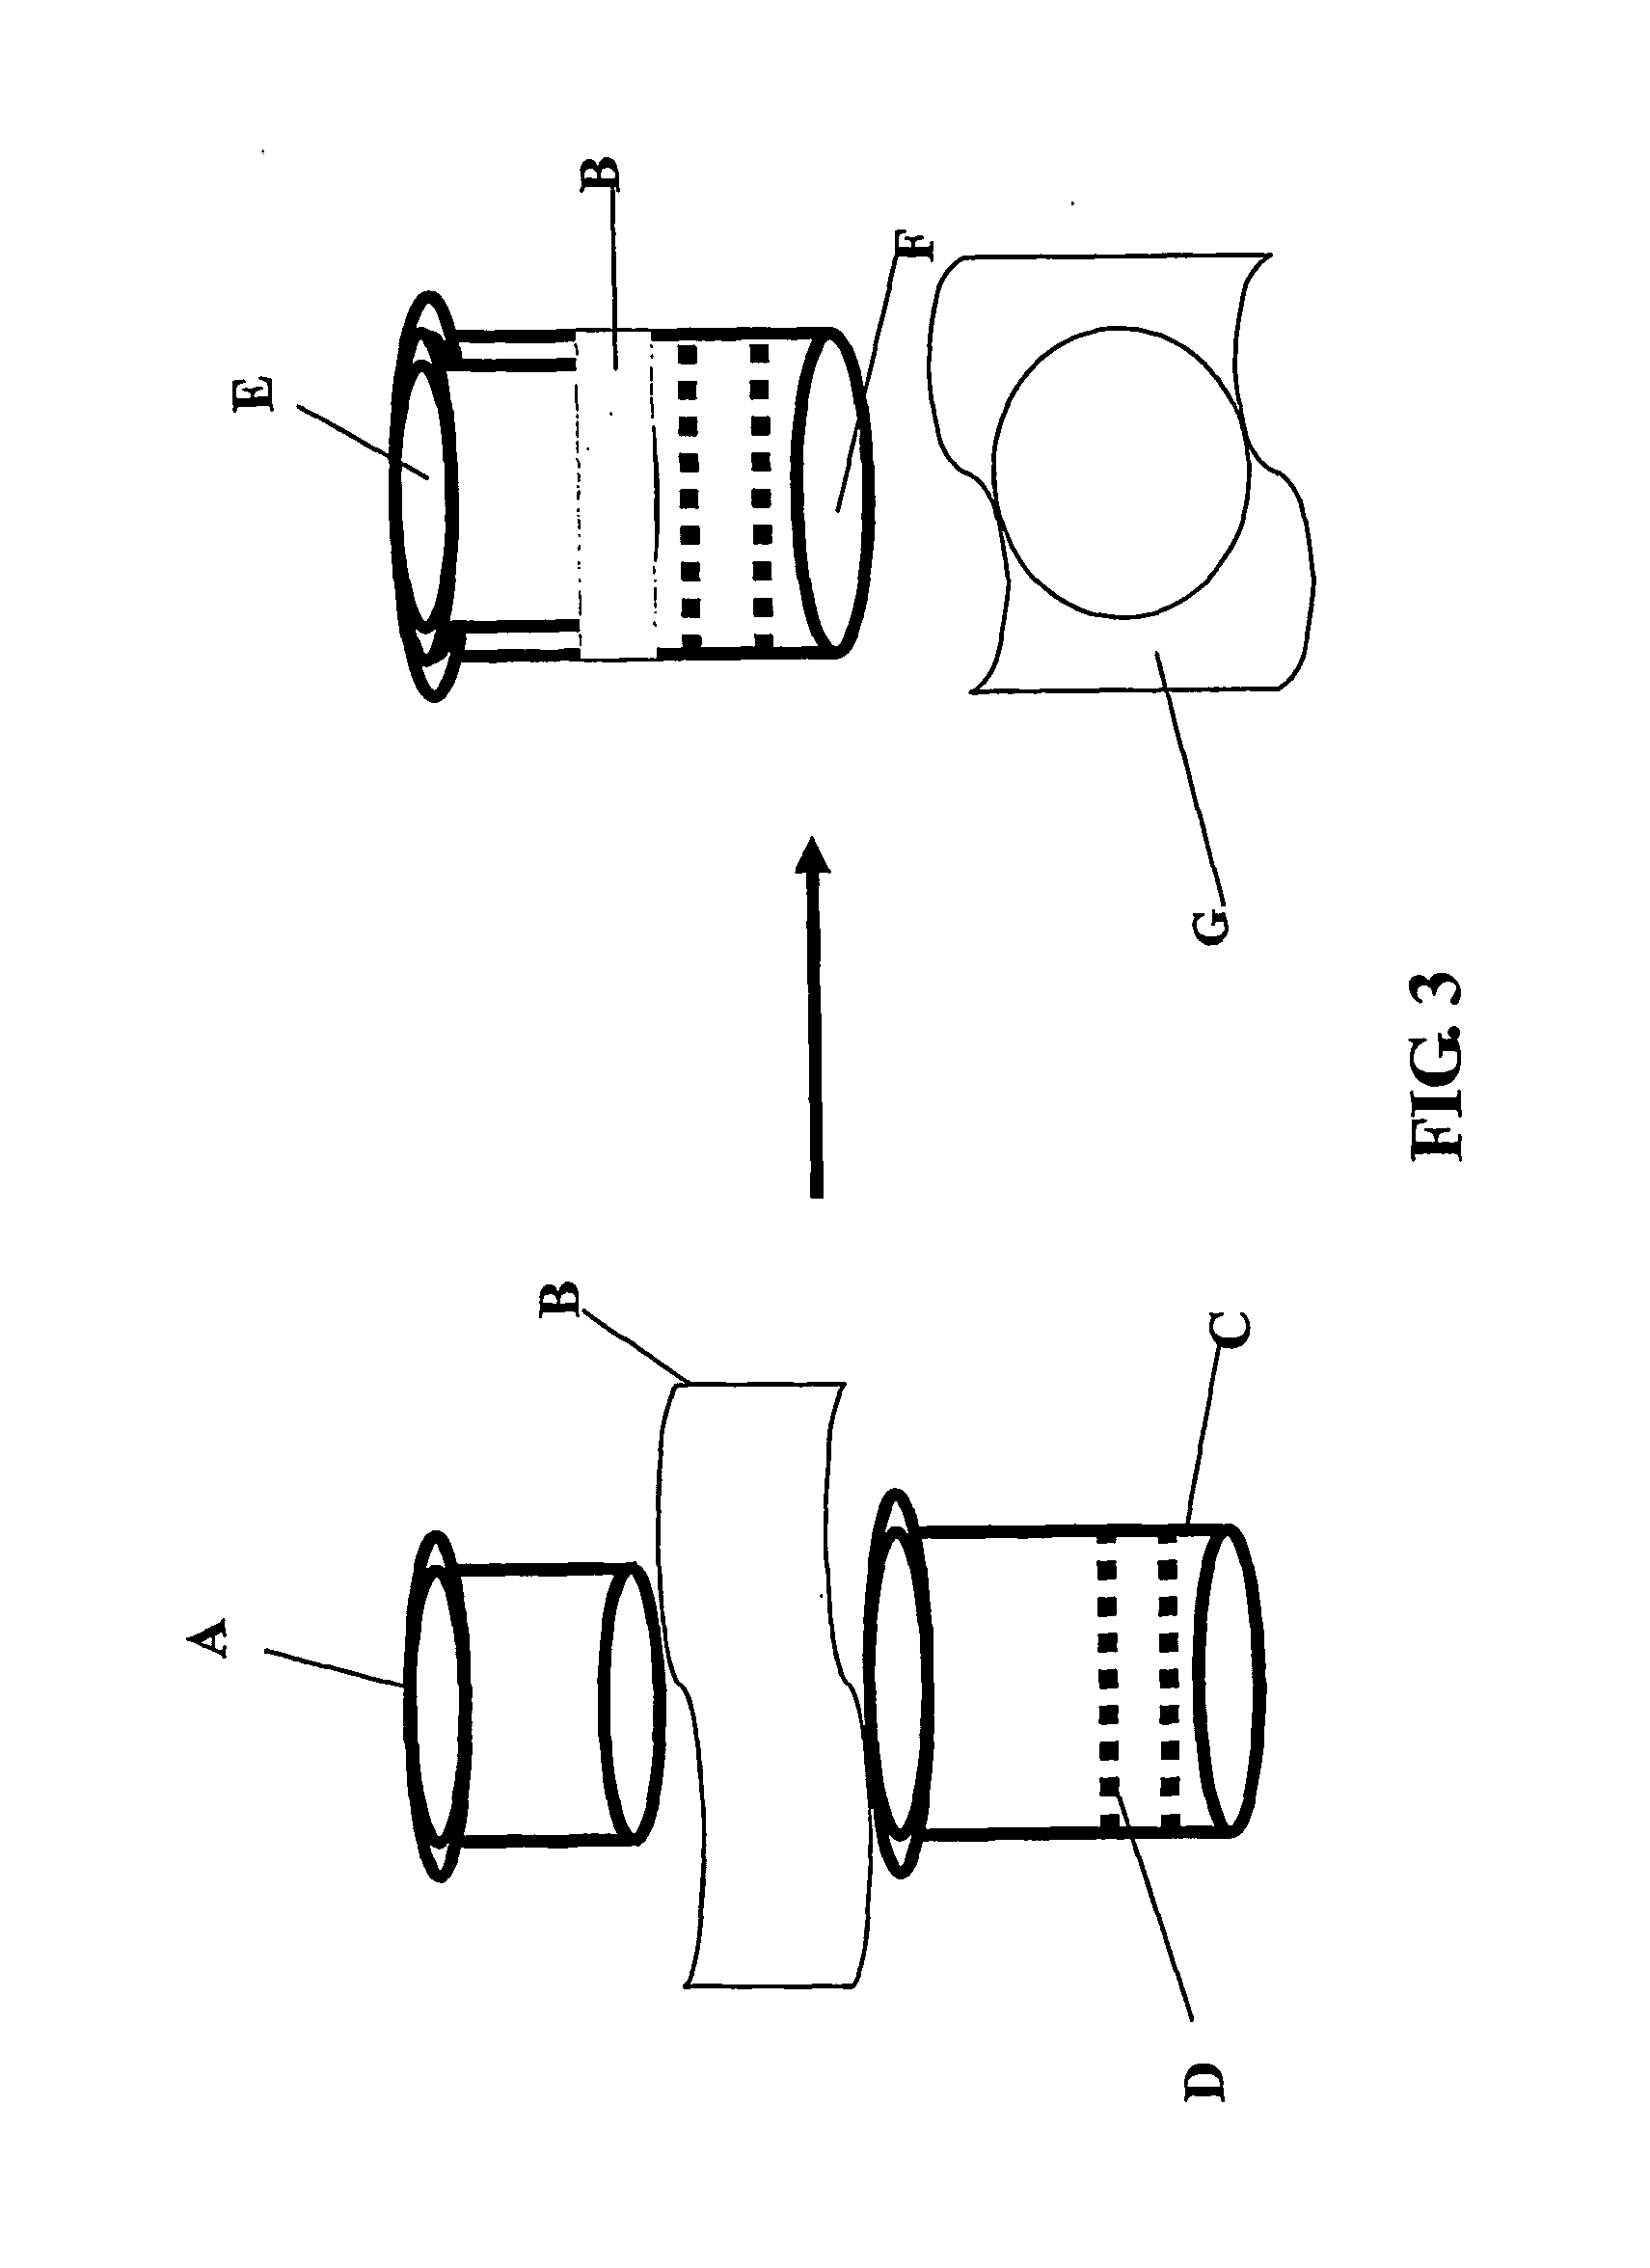 Methods of preparing transplantable product for treatment of skin defects